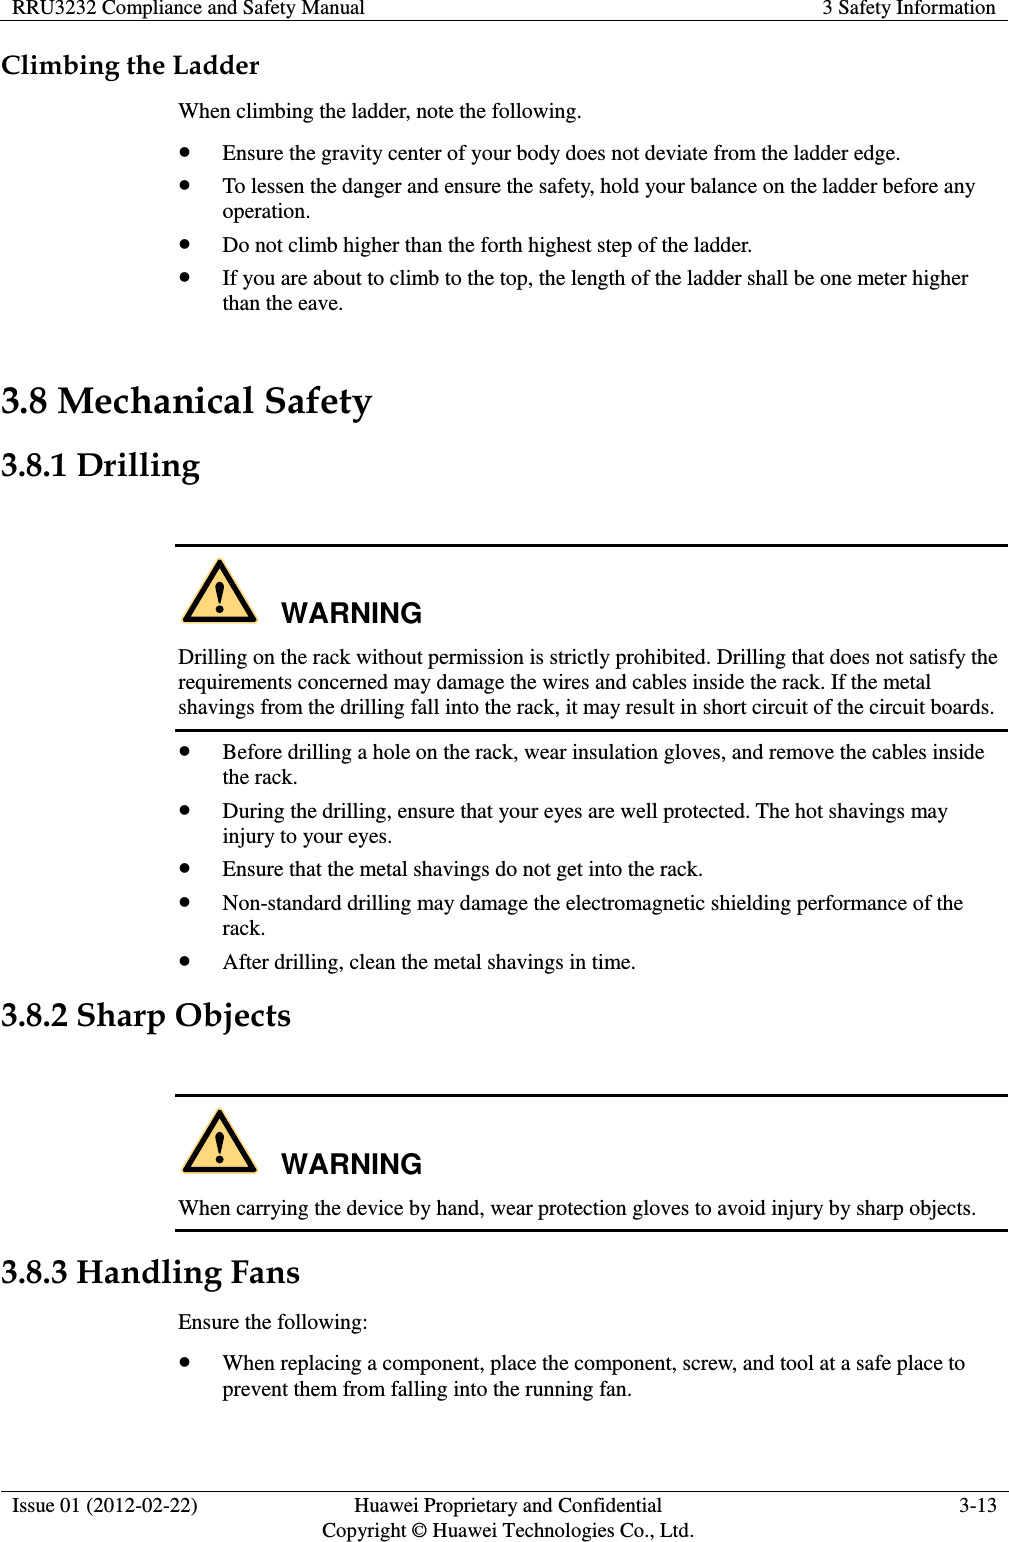 RRU3232 Compliance and Safety Manual 3 Safety Information  Issue 01 (2012-02-22) Huawei Proprietary and Confidential         Copyright © Huawei Technologies Co., Ltd. 3-13  Climbing the Ladder When climbing the ladder, note the following.  Ensure the gravity center of your body does not deviate from the ladder edge.  To lessen the danger and ensure the safety, hold your balance on the ladder before any operation.  Do not climb higher than the forth highest step of the ladder.  If you are about to climb to the top, the length of the ladder shall be one meter higher than the eave. 3.8 Mechanical Safety 3.8.1 Drilling  WARNING Drilling on the rack without permission is strictly prohibited. Drilling that does not satisfy the requirements concerned may damage the wires and cables inside the rack. If the metal shavings from the drilling fall into the rack, it may result in short circuit of the circuit boards.  Before drilling a hole on the rack, wear insulation gloves, and remove the cables inside the rack.  During the drilling, ensure that your eyes are well protected. The hot shavings may injury to your eyes.  Ensure that the metal shavings do not get into the rack.  Non-standard drilling may damage the electromagnetic shielding performance of the rack.  After drilling, clean the metal shavings in time. 3.8.2 Sharp Objects  WARNING When carrying the device by hand, wear protection gloves to avoid injury by sharp objects. 3.8.3 Handling Fans Ensure the following:  When replacing a component, place the component, screw, and tool at a safe place to prevent them from falling into the running fan. 